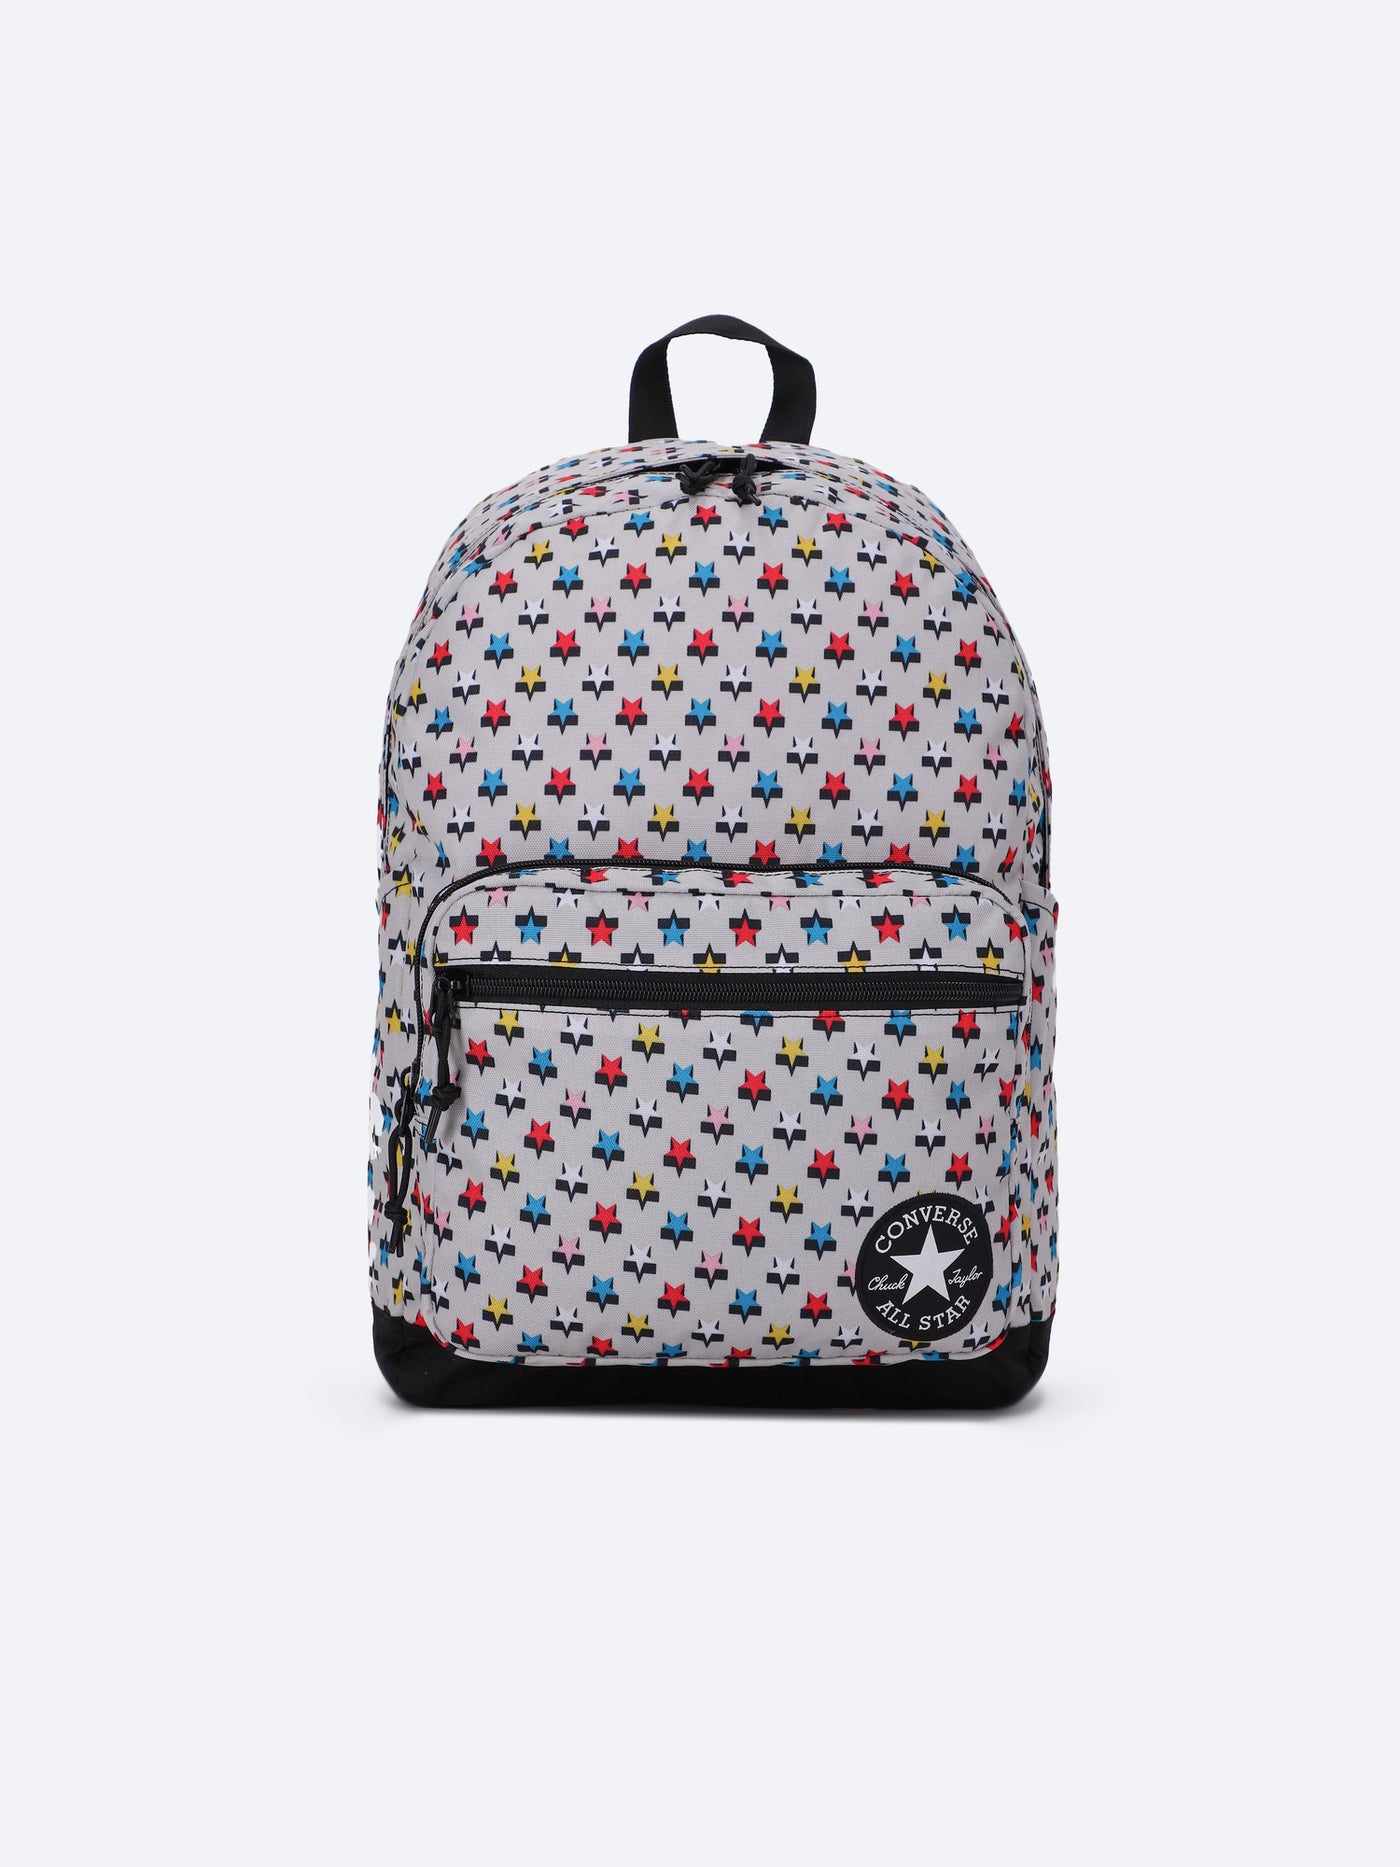 Converse Unisex Go 2 Backpack - 10019901-A05